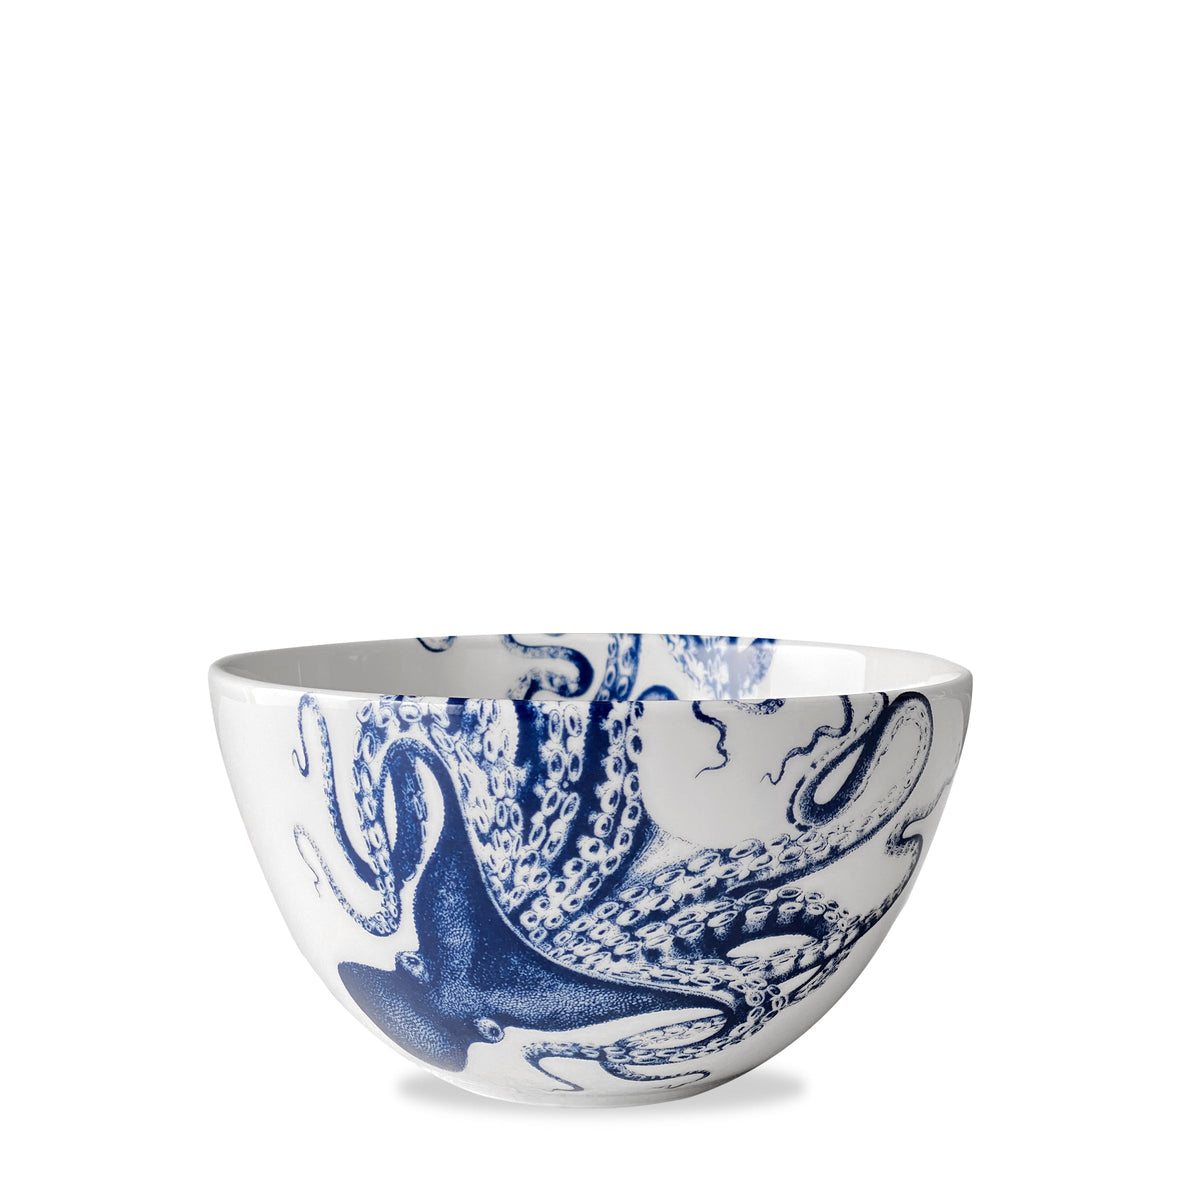 A modern appeal Lucy Tall Cereal Bowl with an octopus on it, made of premium porcelain.